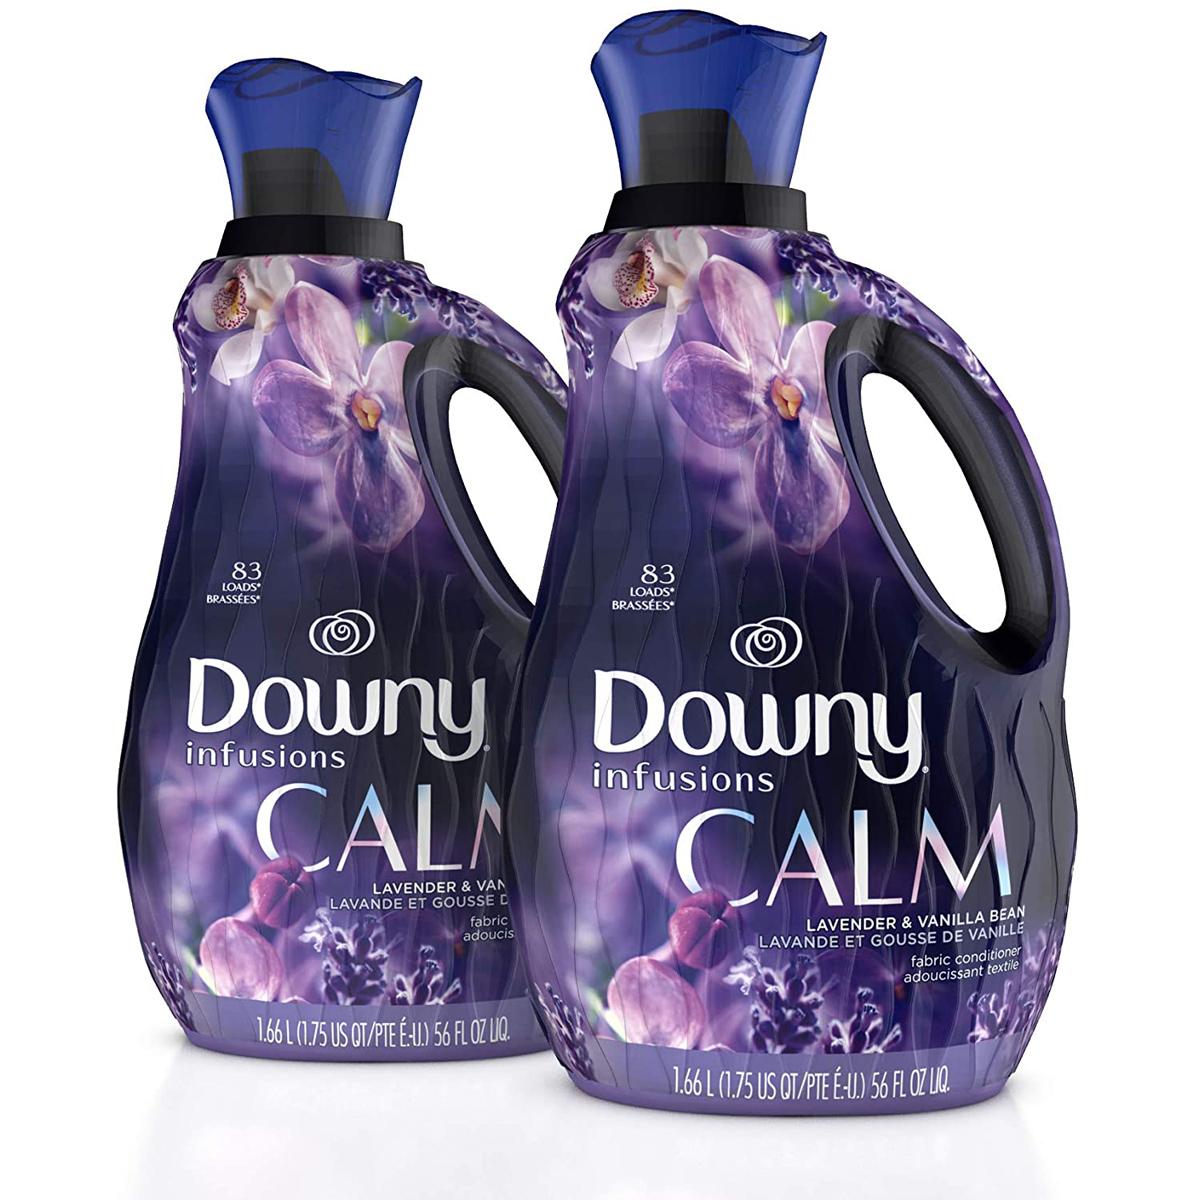 2 Downy Infusions Liquid Laundry Fabric Softener for $9.32 Shipped